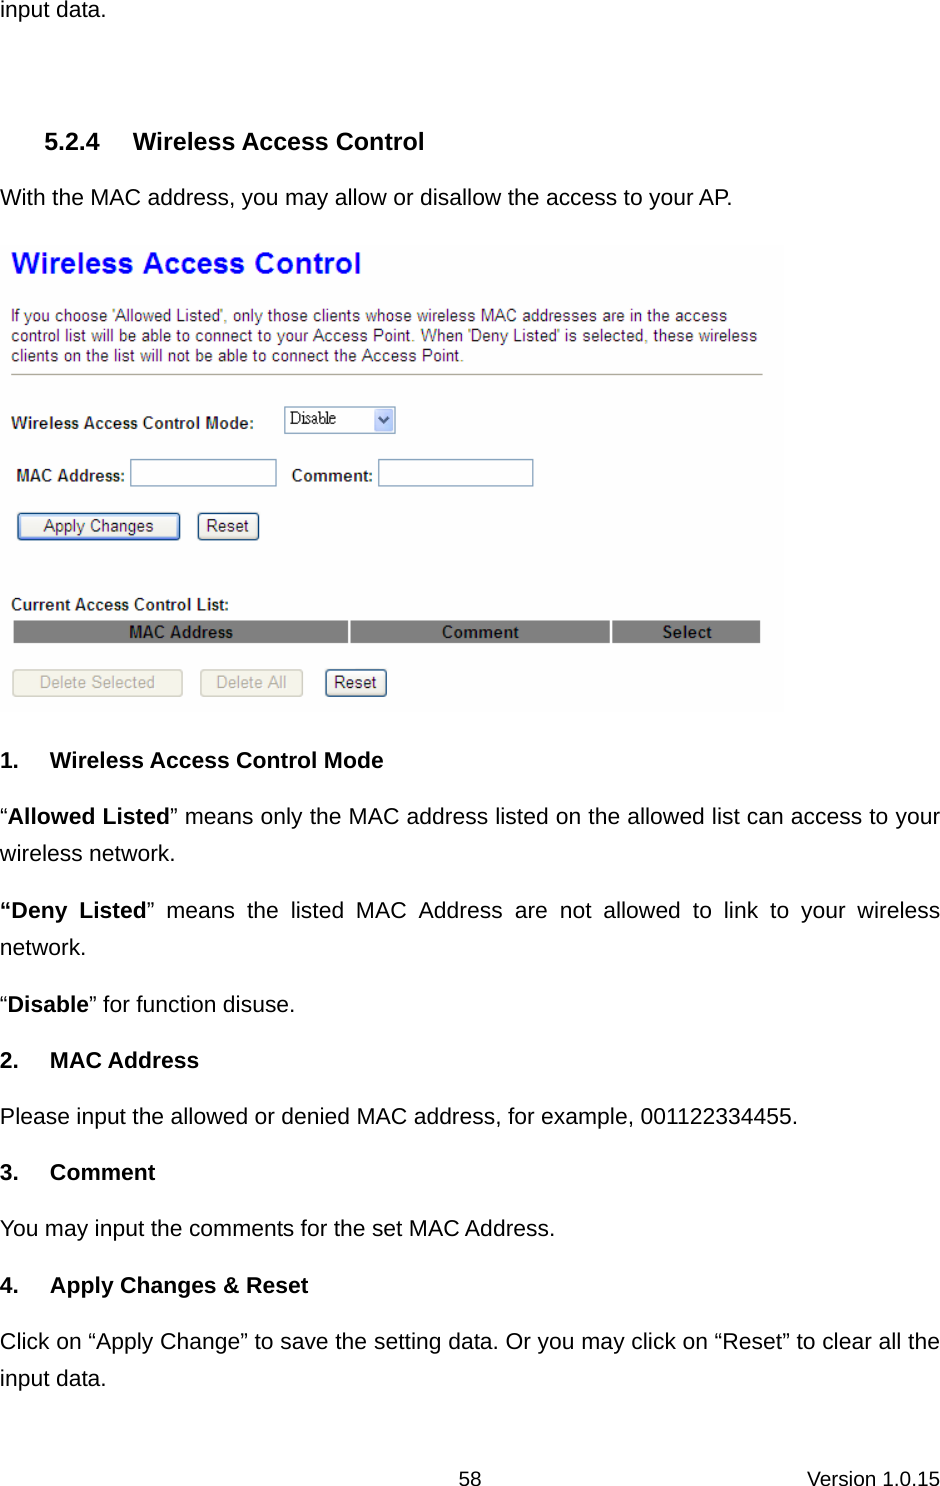 Version 1.0.15 58input data.  5.2.4 Wireless Access Control With the MAC address, you may allow or disallow the access to your AP.    1.  Wireless Access Control Mode “Allowed Listed” means only the MAC address listed on the allowed list can access to your wireless network.   “Deny Listed” means the listed MAC Address are not allowed to link to your wireless network.  “Disable” for function disuse.   2. MAC Address Please input the allowed or denied MAC address, for example, 001122334455. 3. Comment You may input the comments for the set MAC Address.   4.  Apply Changes &amp; Reset Click on “Apply Change” to save the setting data. Or you may click on “Reset” to clear all the input data. 